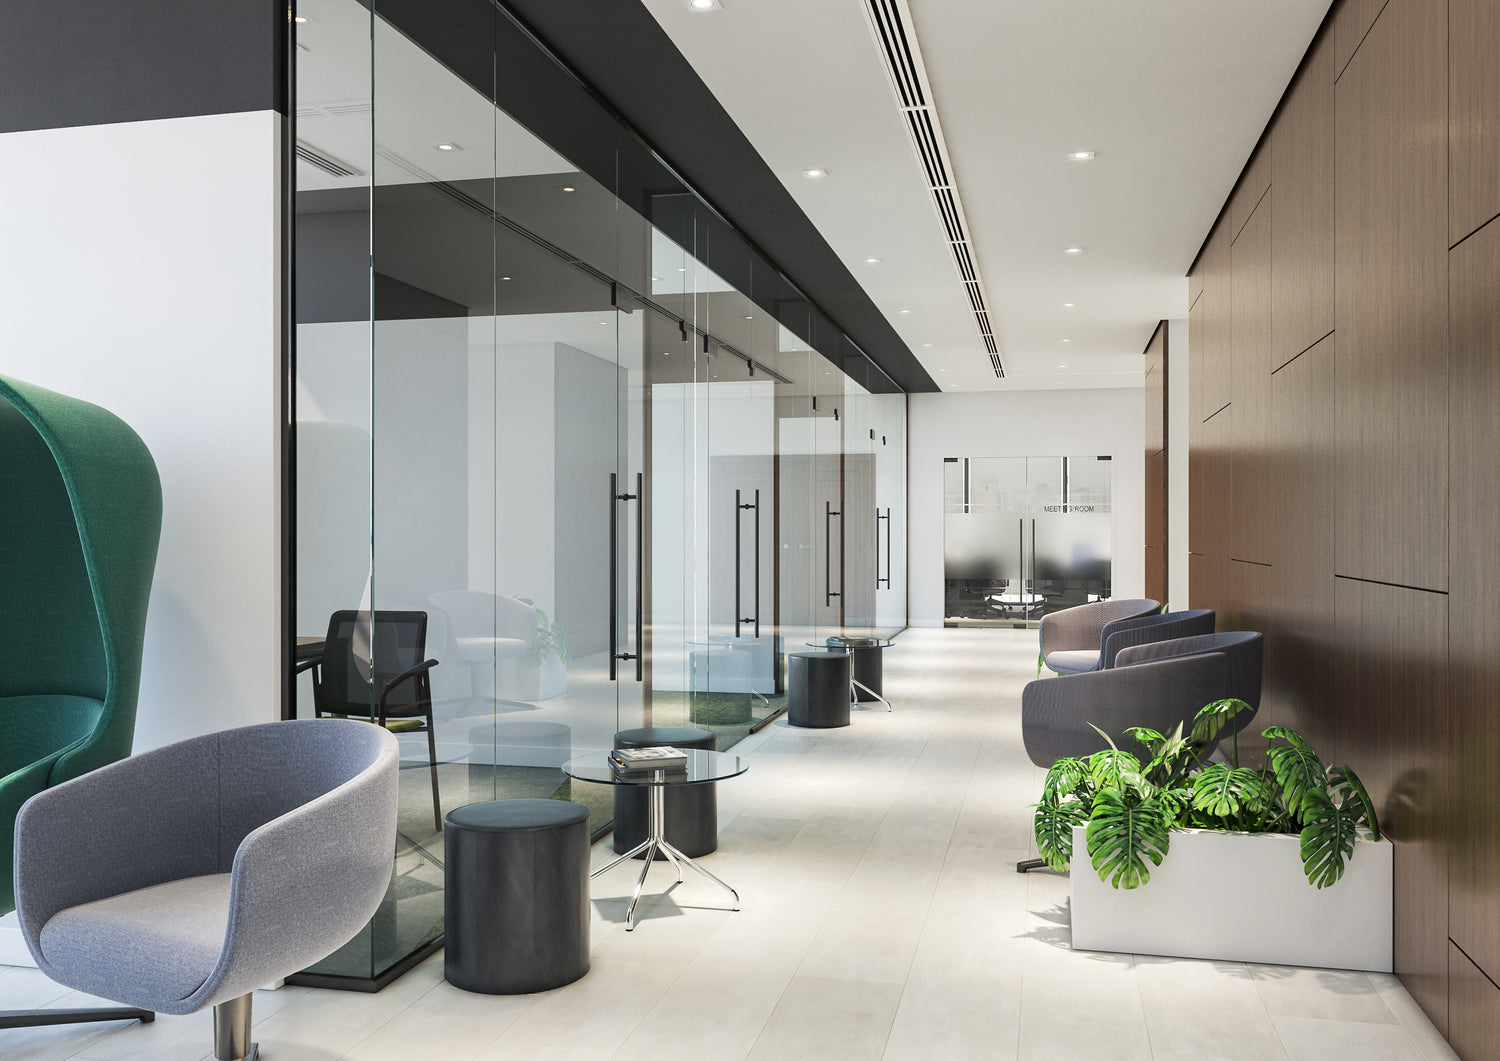 Interior Design of an Office Space by Atelier 21 KSA for the National Dialogue in Saudi Arabia